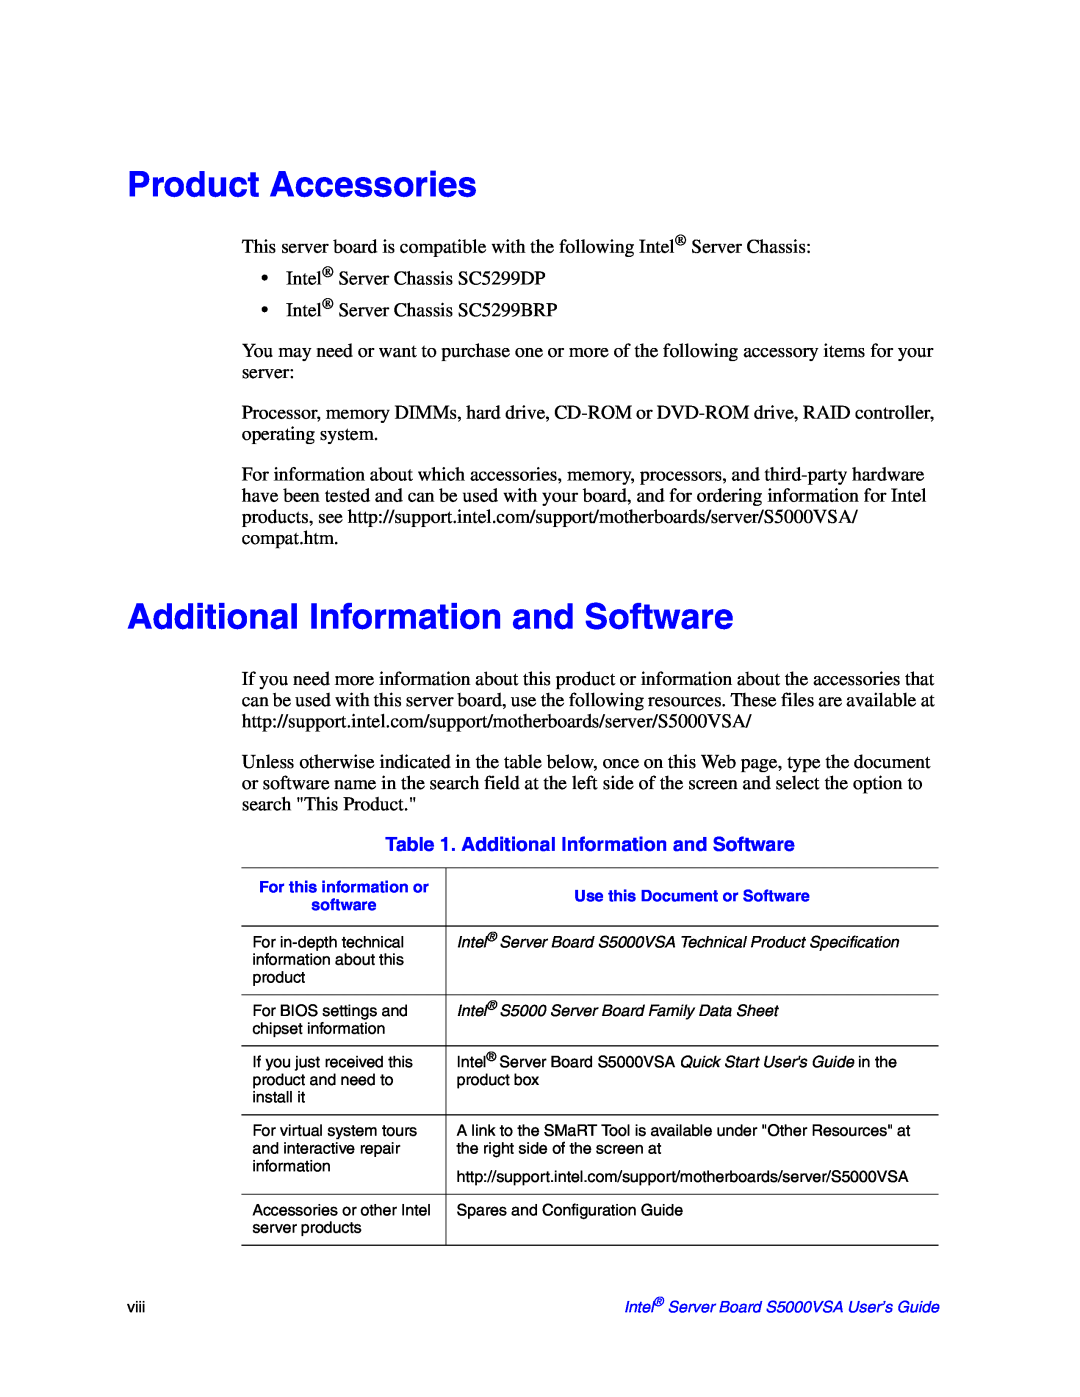 Intel S5000VSA manual Product Accessories, Additional Information and Software 